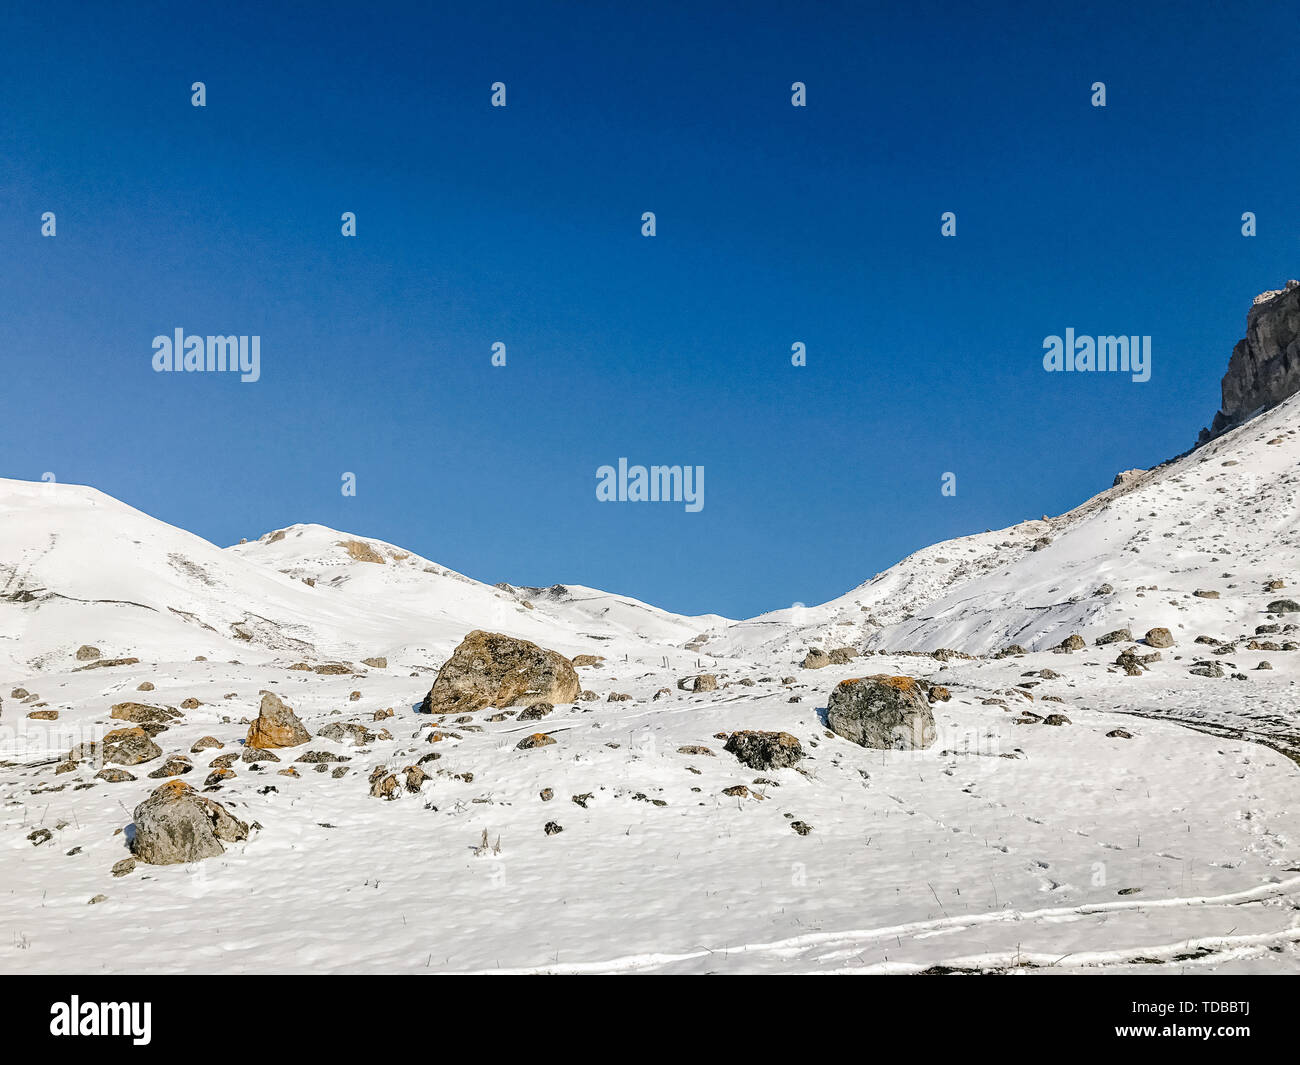 landscape of mountains and hills covered with snow against the sky Stock Photo